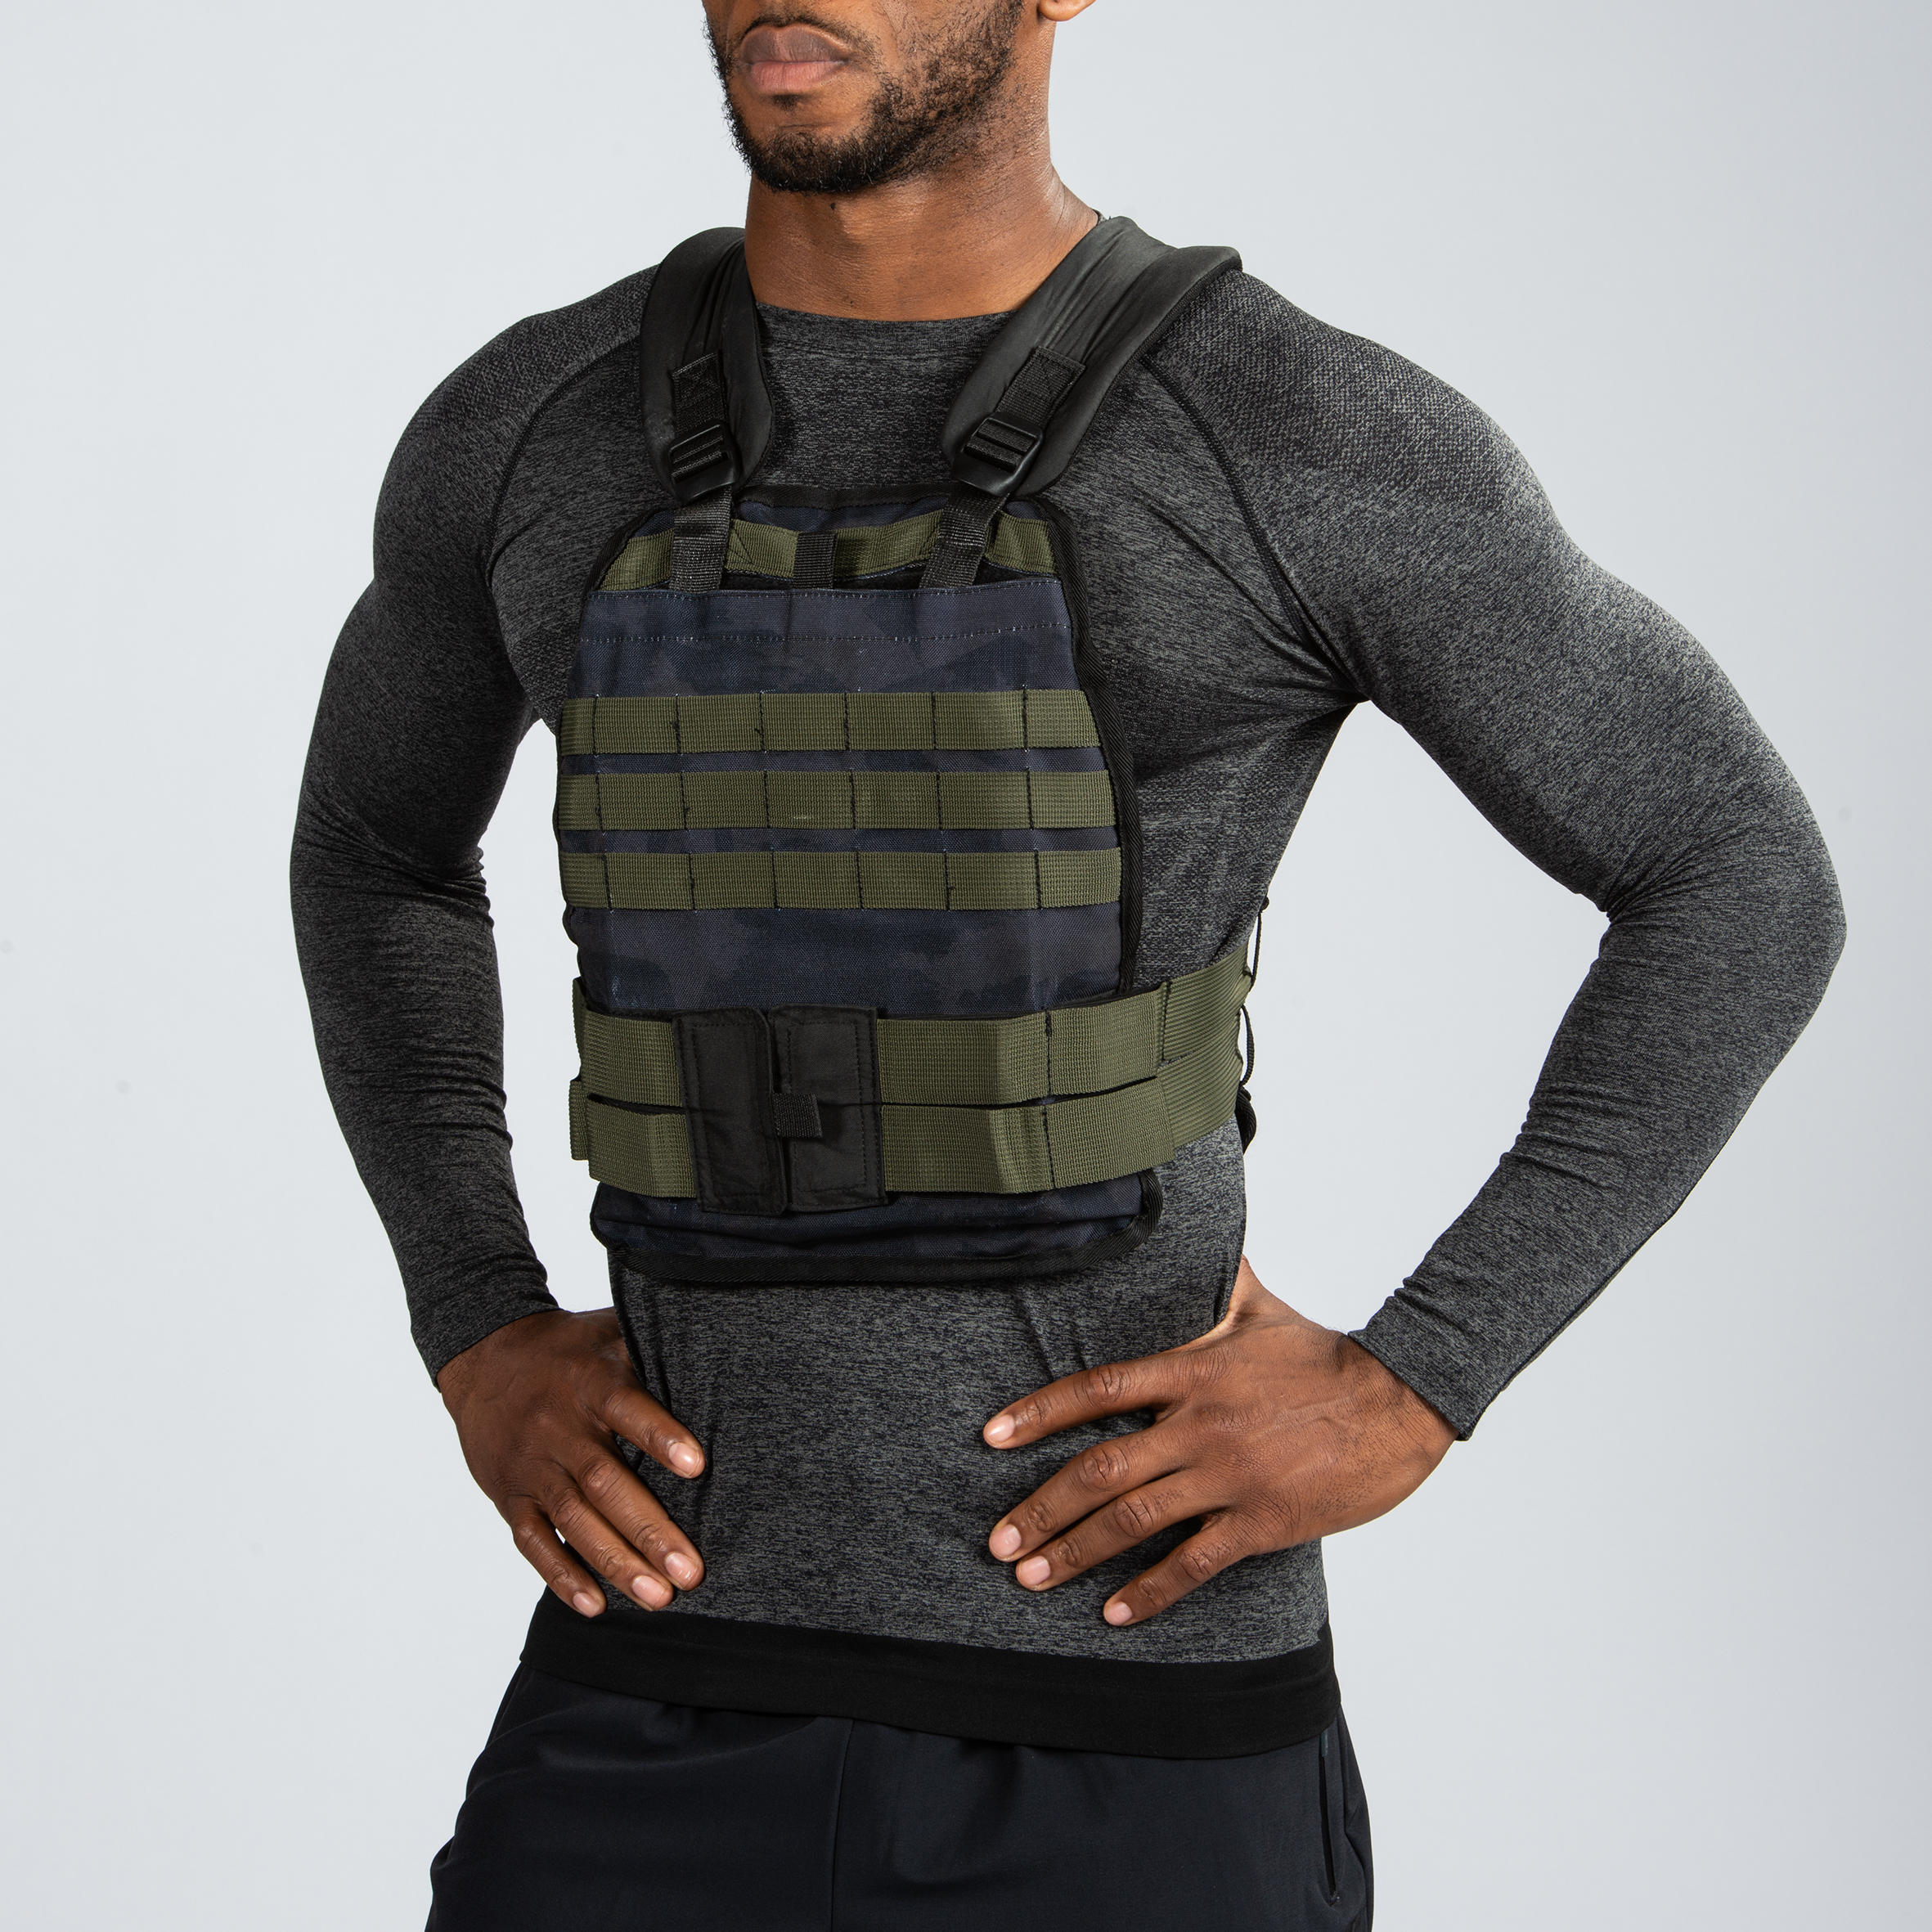 Strength and Cross Training Weighted Vest - 10 kg - CORENGTH